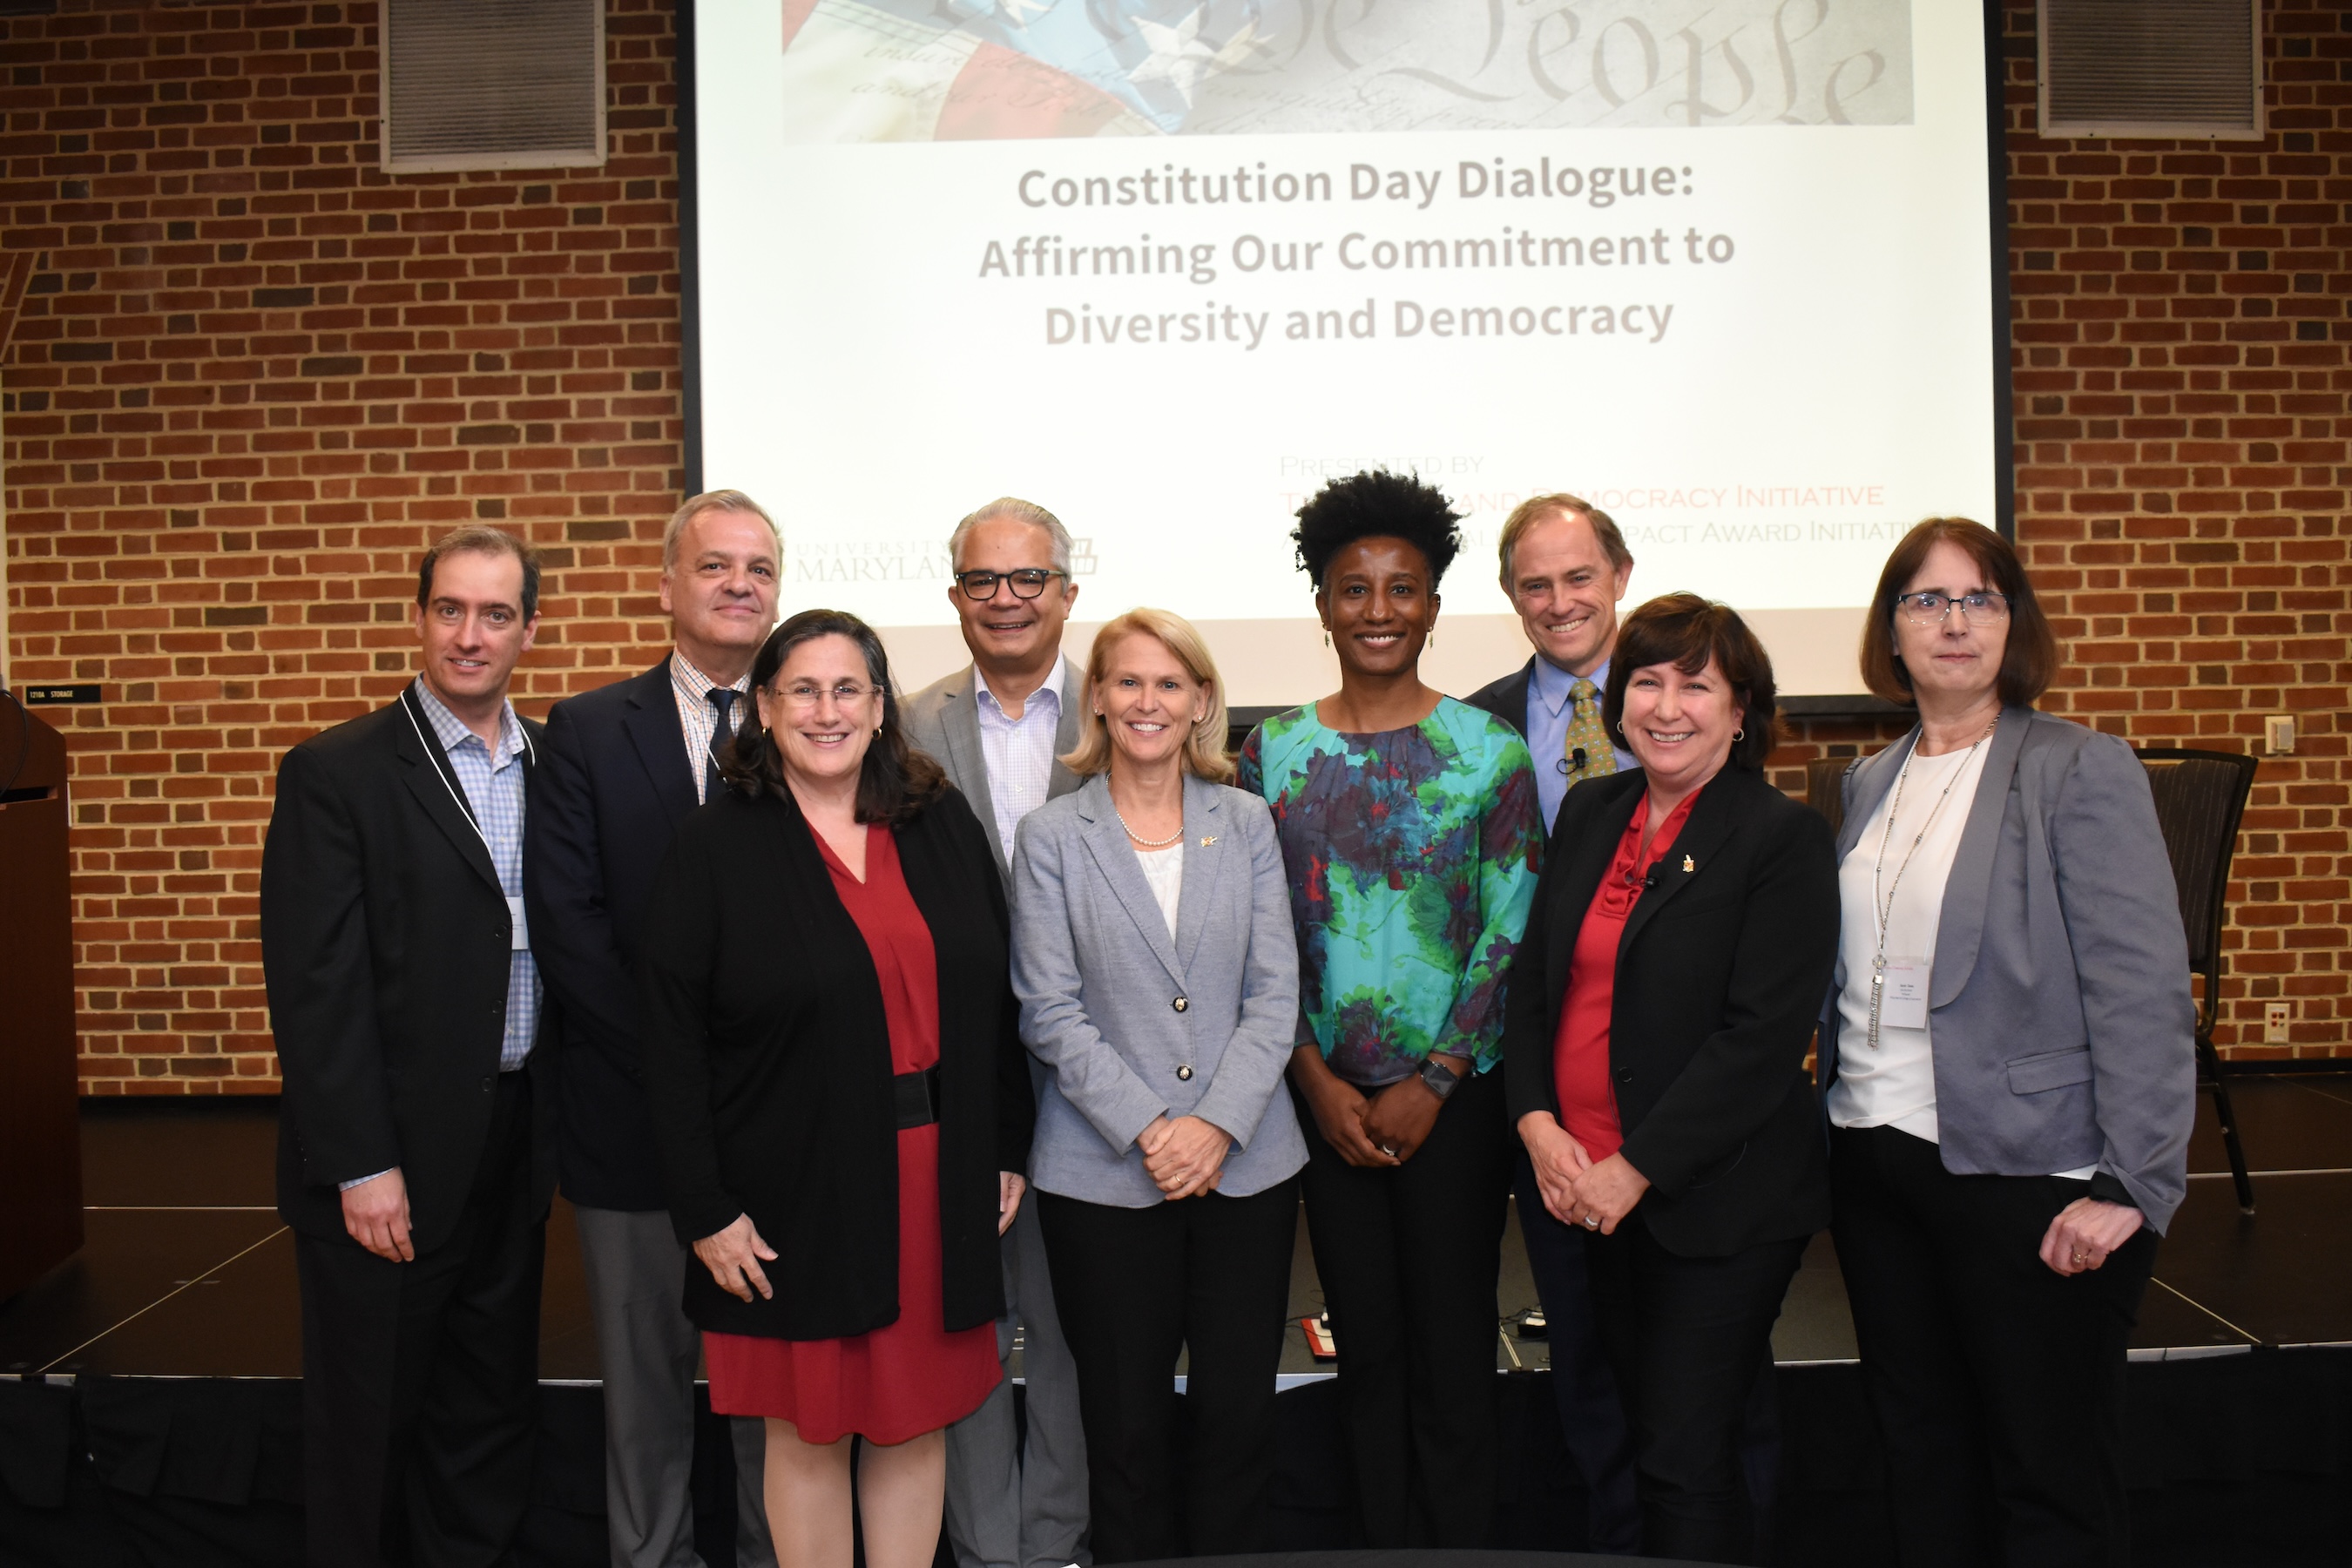 MDI Photo from Constitution Day Dialogue Event